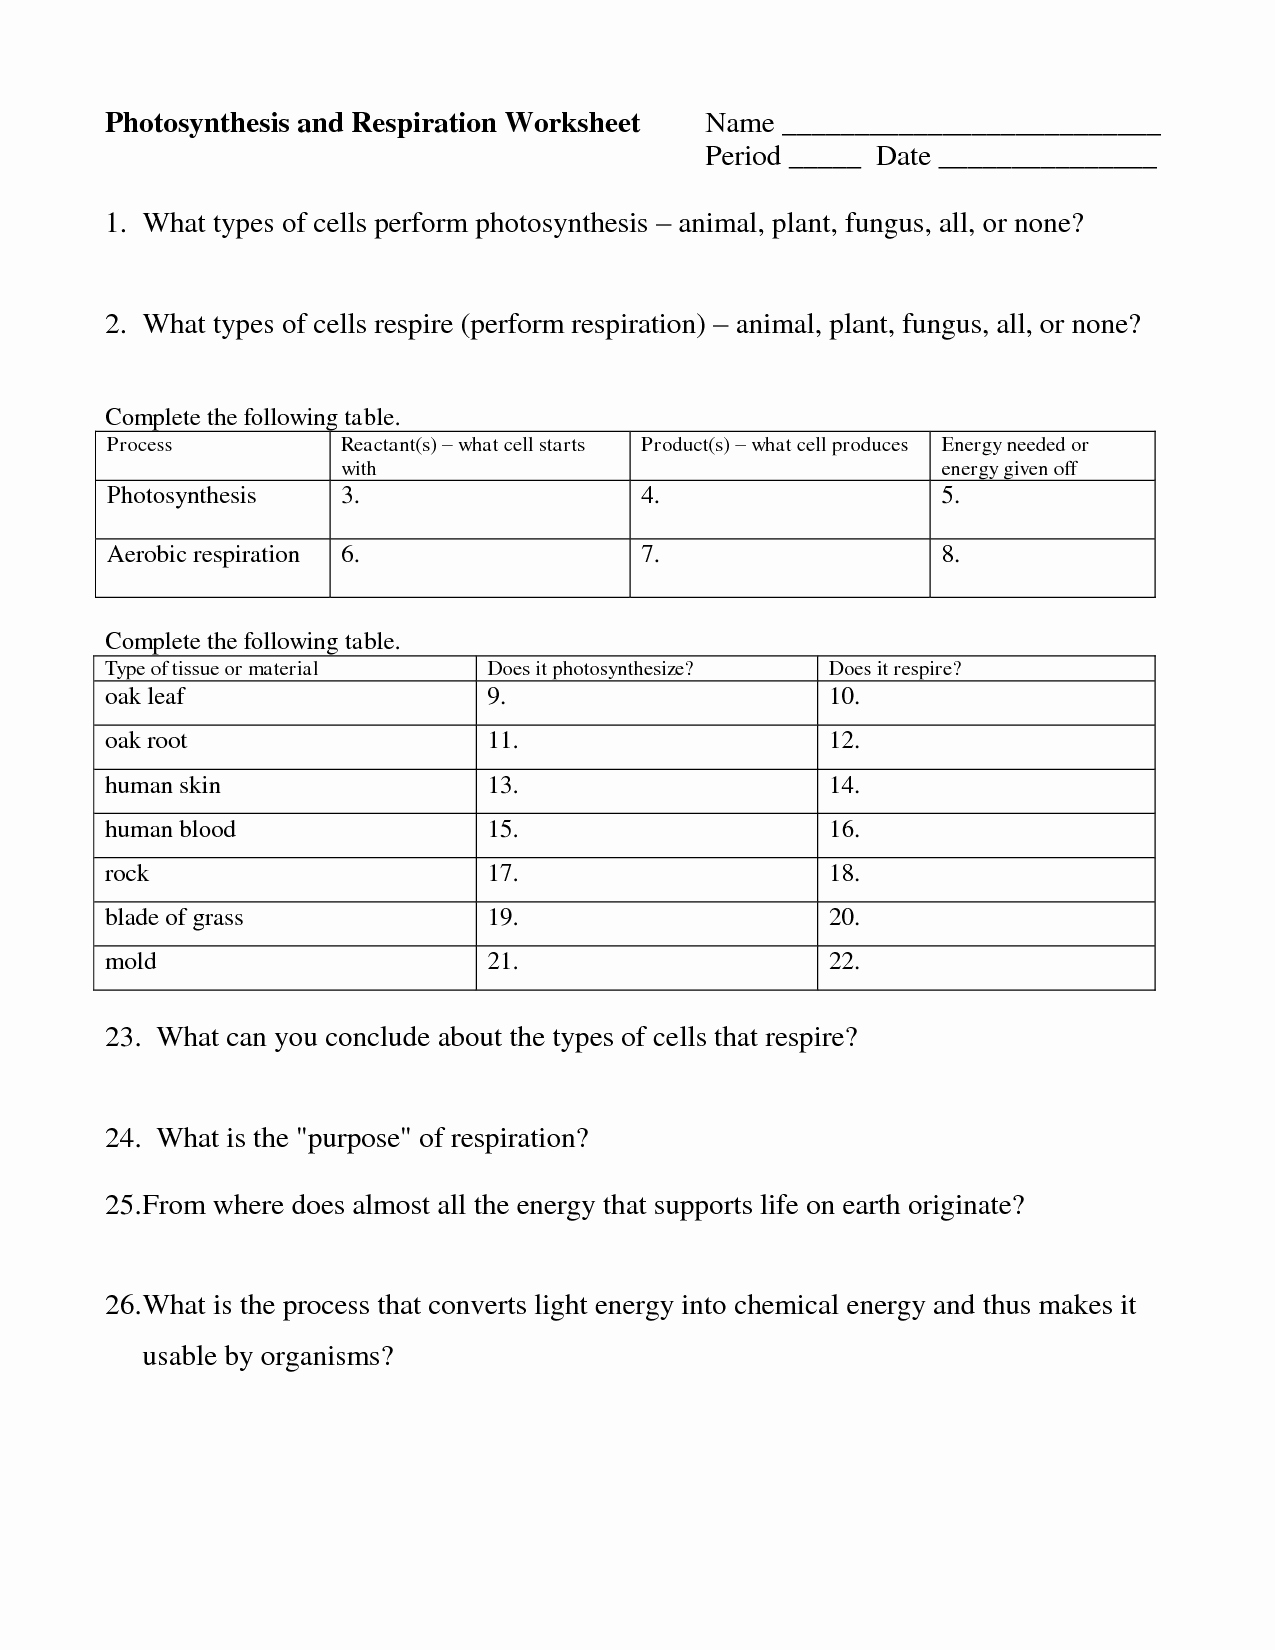 Photosynthesis and Cellular Respiration Worksheet Luxury 15 Best Of Plant Synthesis Worksheet